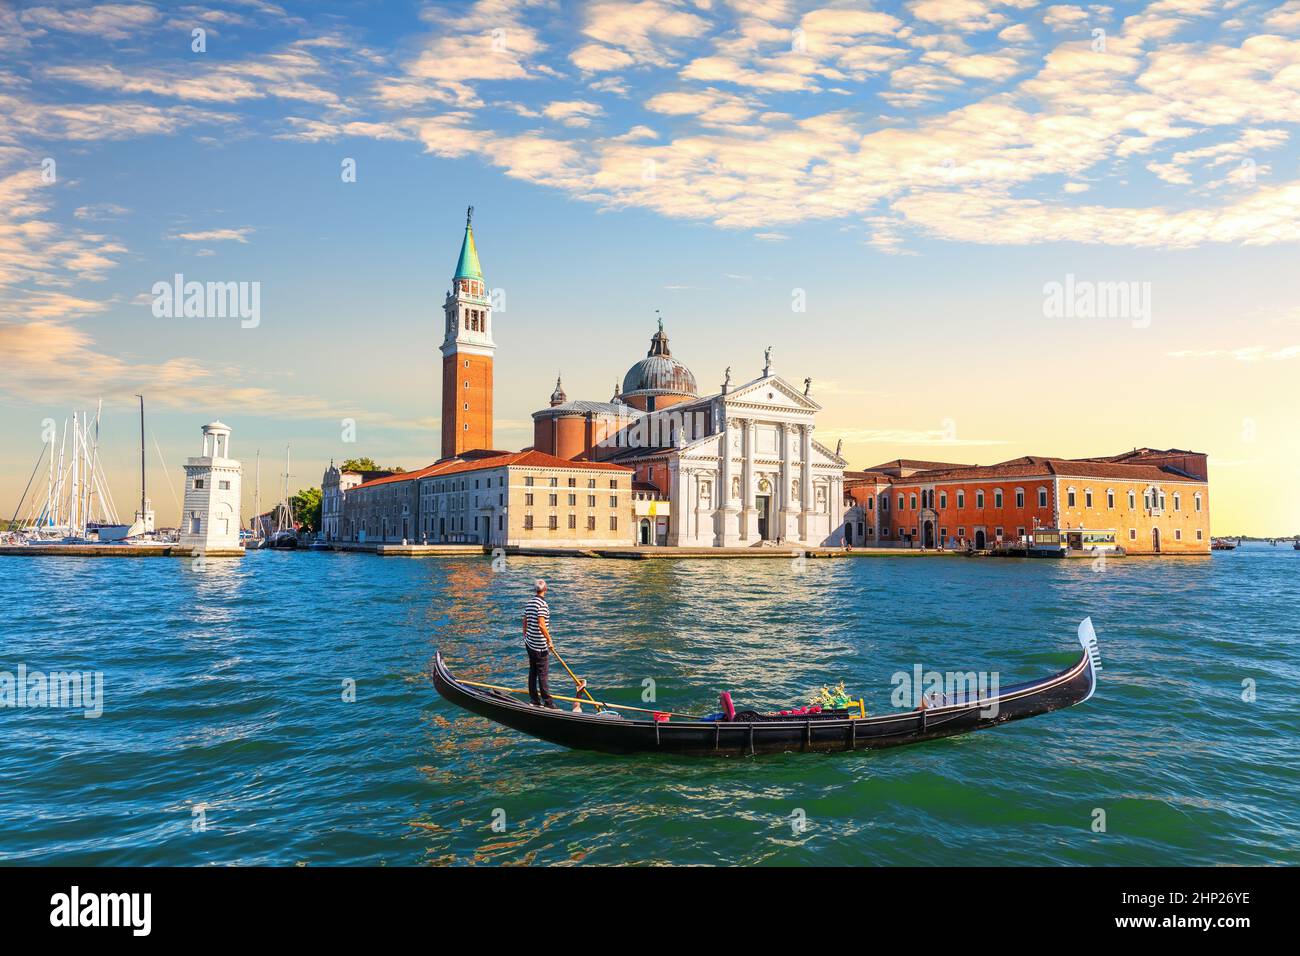 St. George Monastery in the island of the Venice Lagoon, Italy. Stock Photo